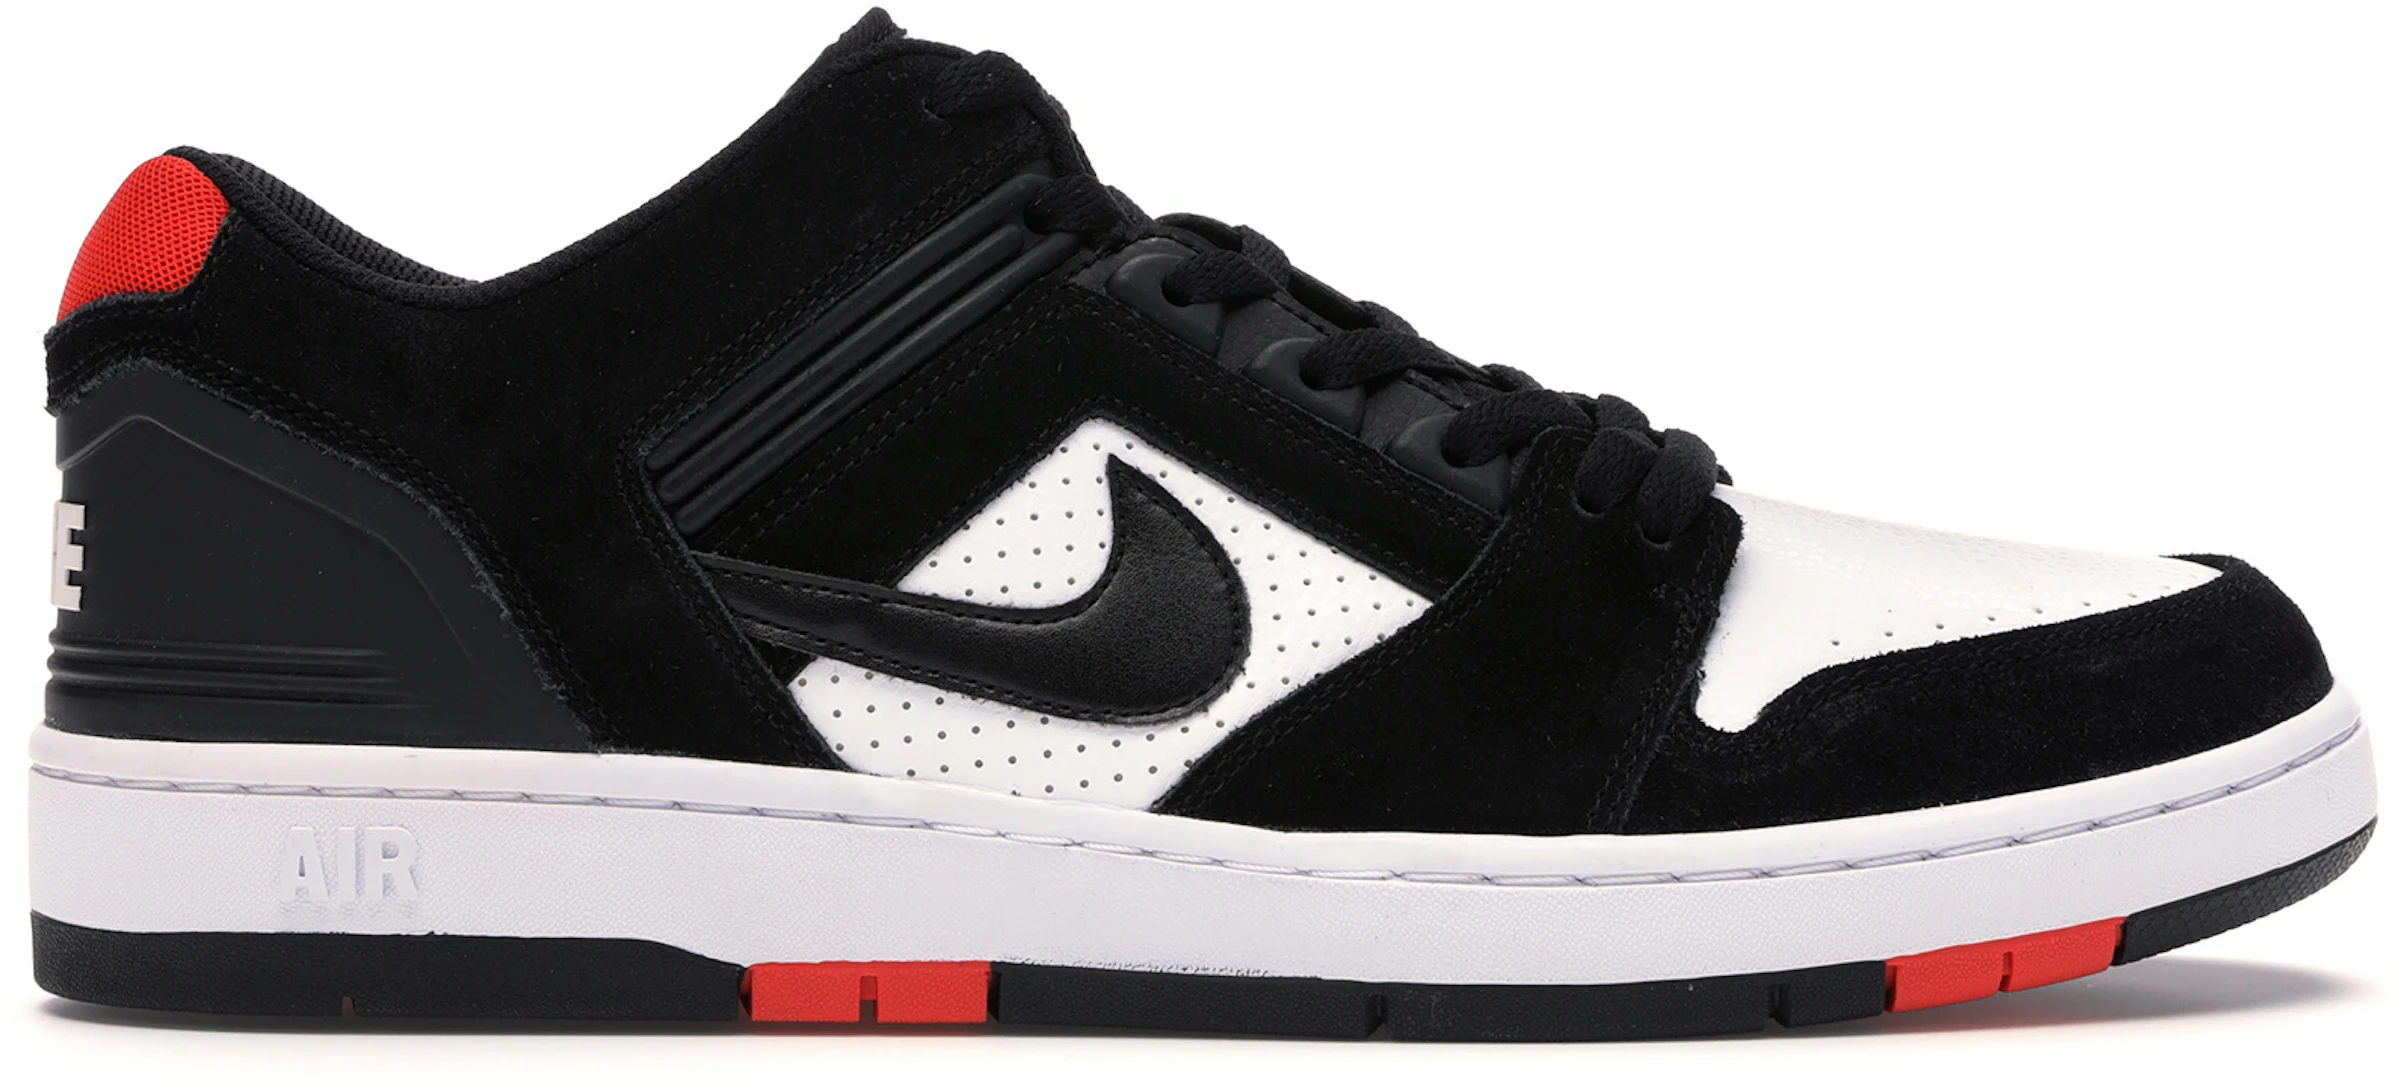 boom druiven Bad Nike SB Air Force 2 Low Black White Habanero Red - AO0300-006 - US